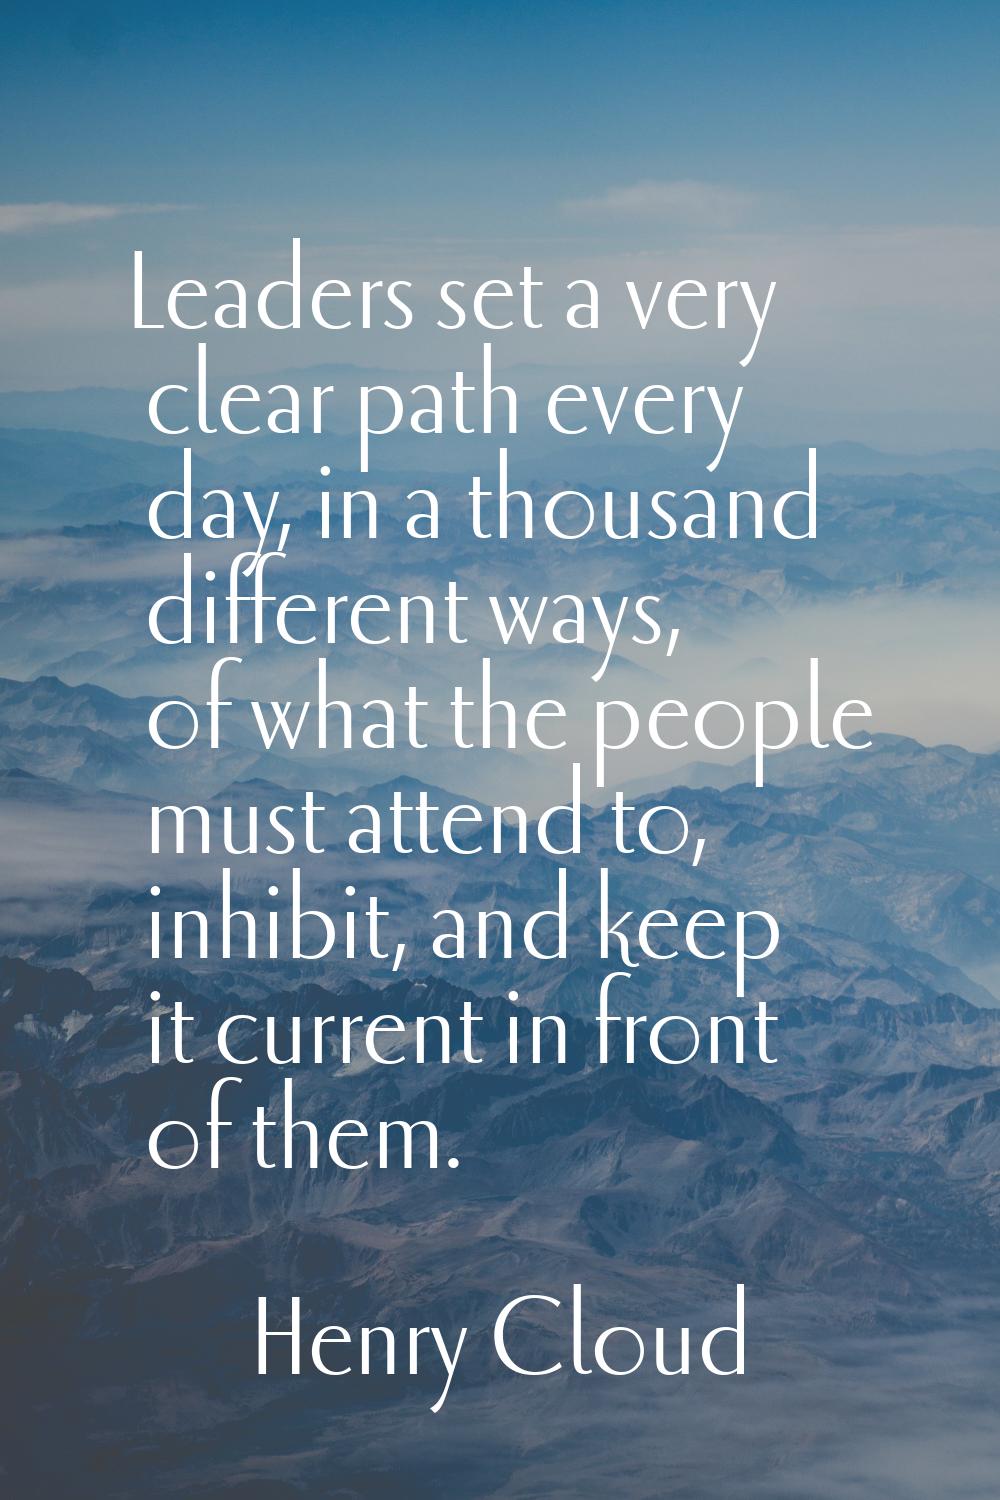 Leaders set a very clear path every day, in a thousand different ways, of what the people must atte